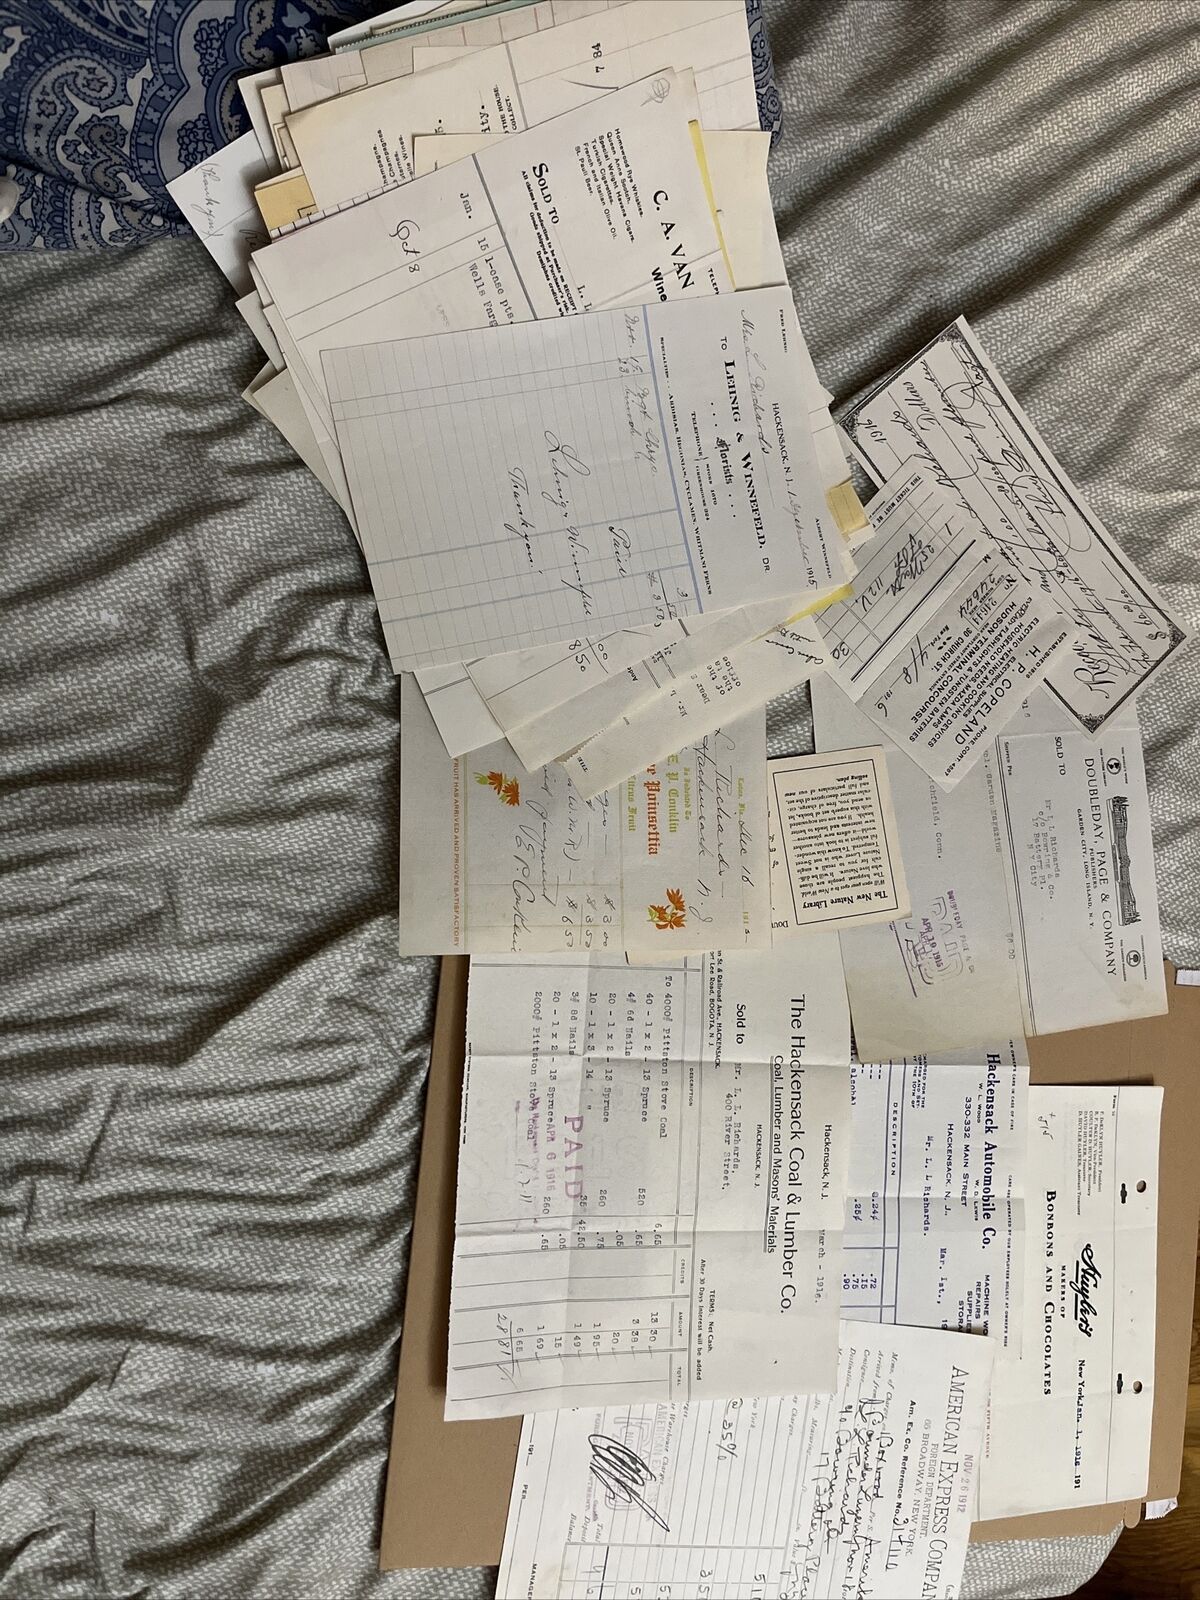 85 + Pieces Pre-1920: Hackensack NJ Man’s Invoices, Bills, Letters: NYC + More